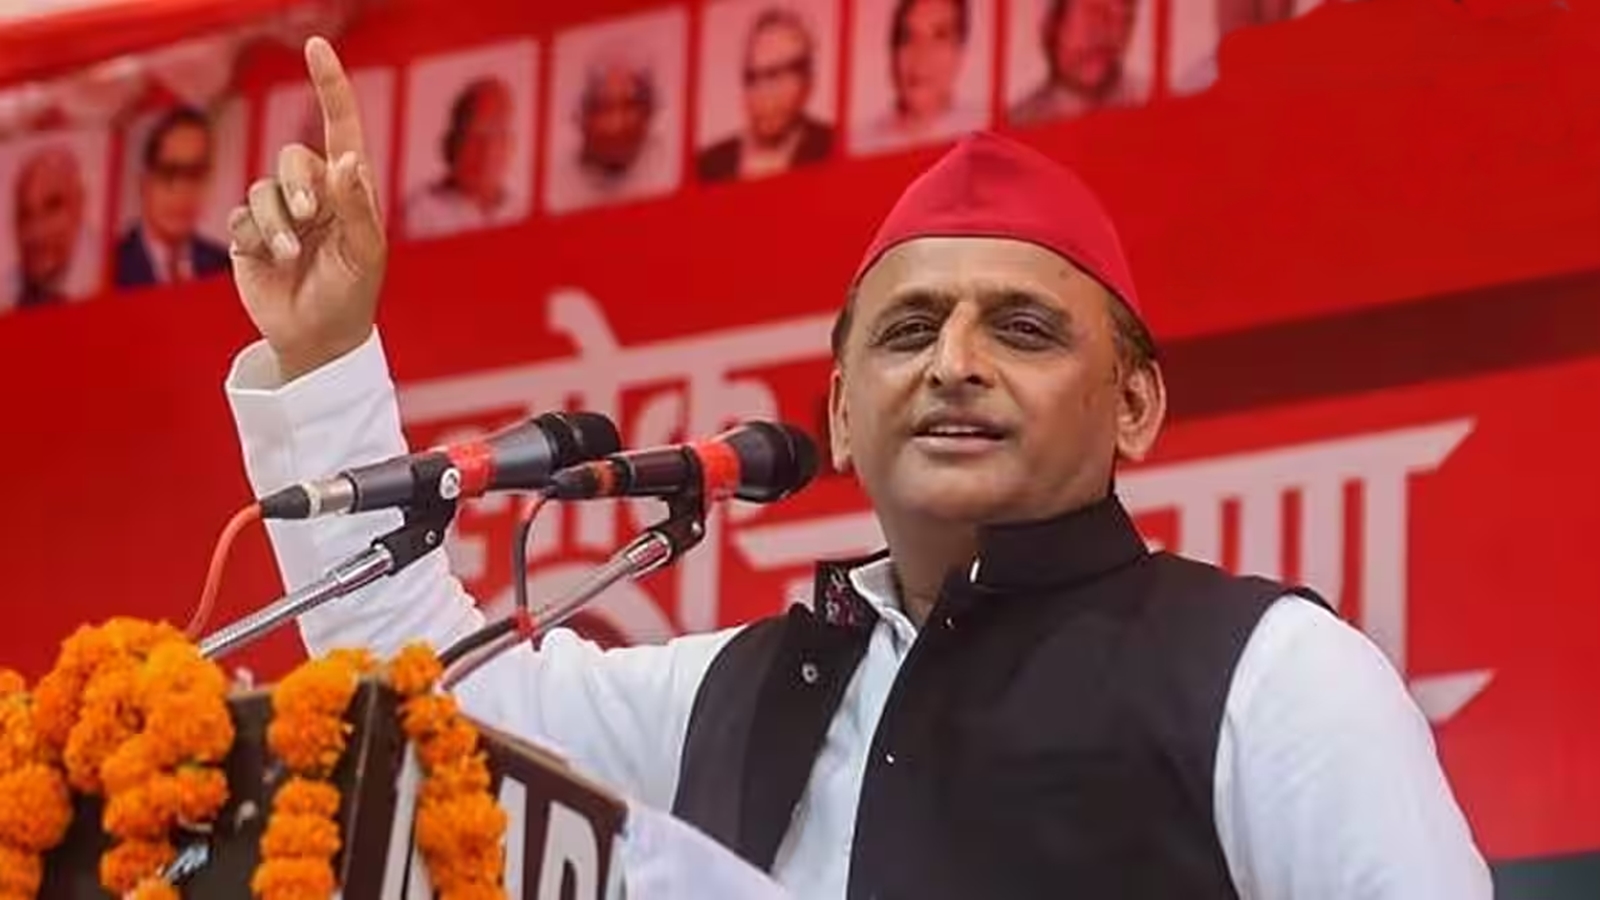 Akhilesh Yadav on seat-sharing within INDIA bloc: ‘Cong has to decide if alliance is at state or national level’ | Lucknow News